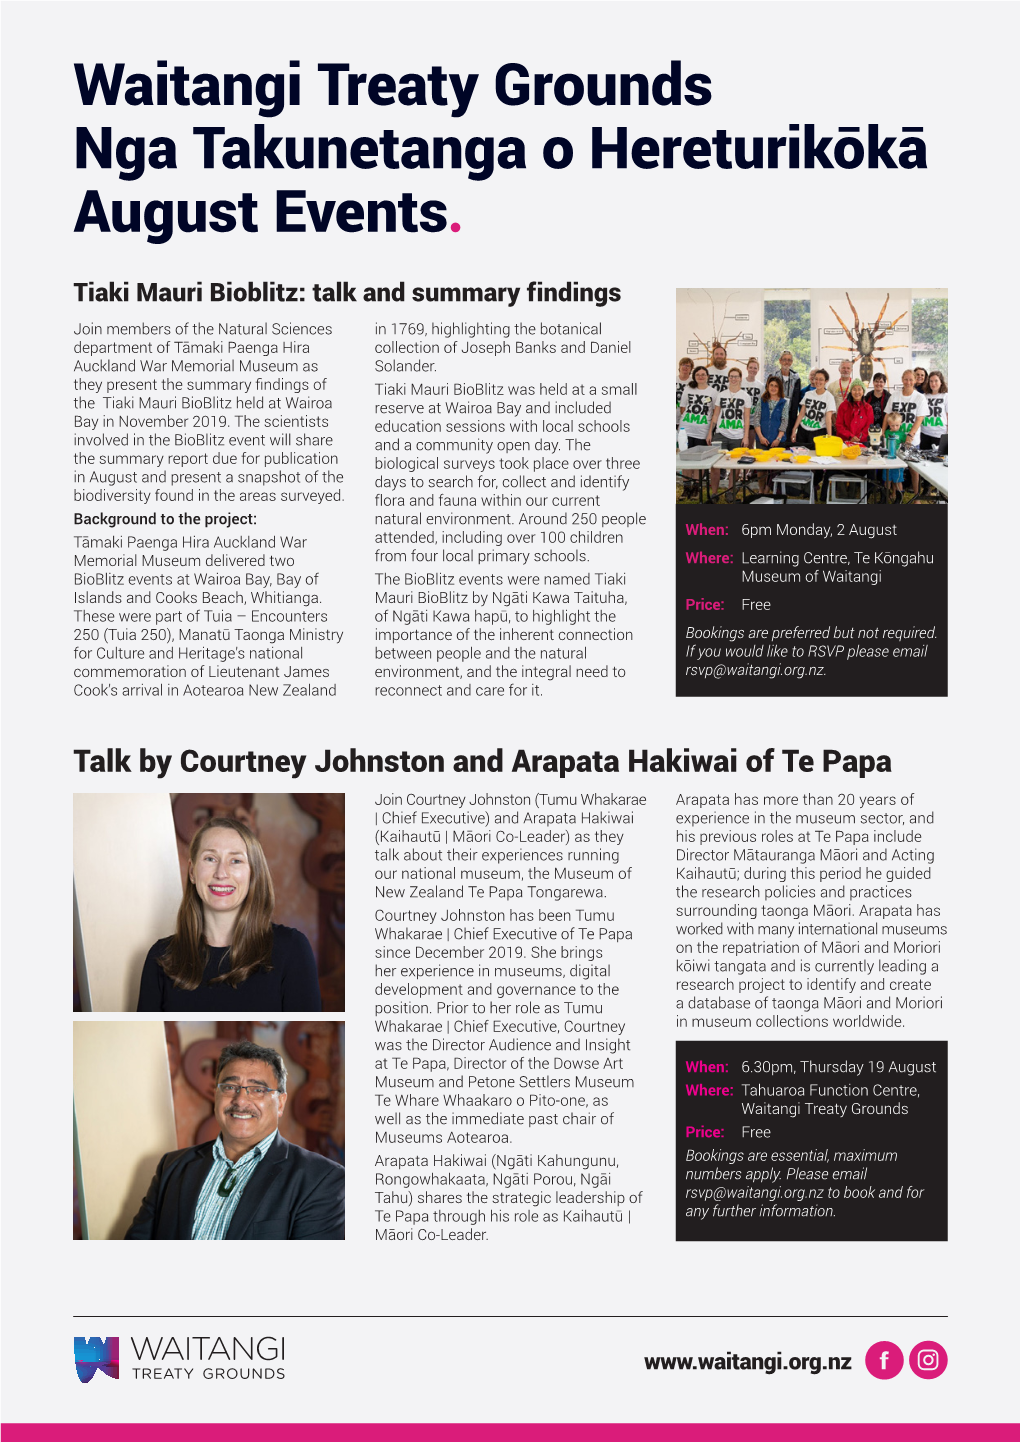 August Events